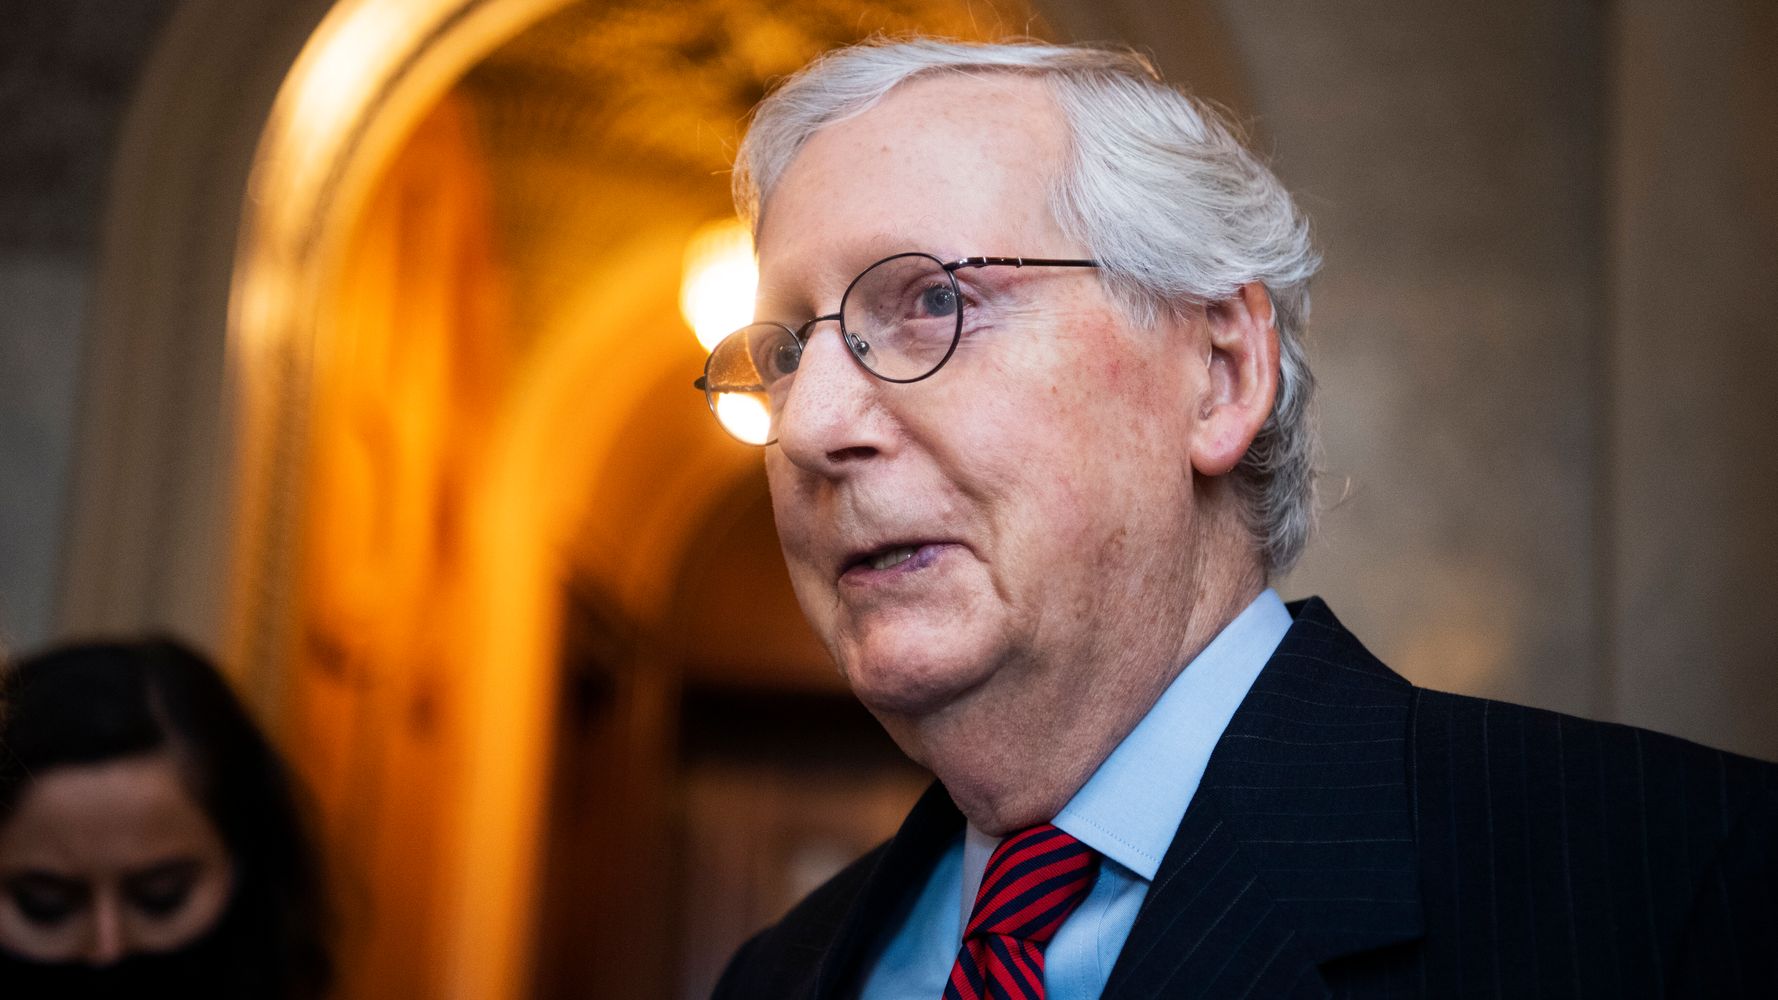 Mitch McConnell Gets COVID-19 Booster On Same Day As Biden: 'Easy Decision'